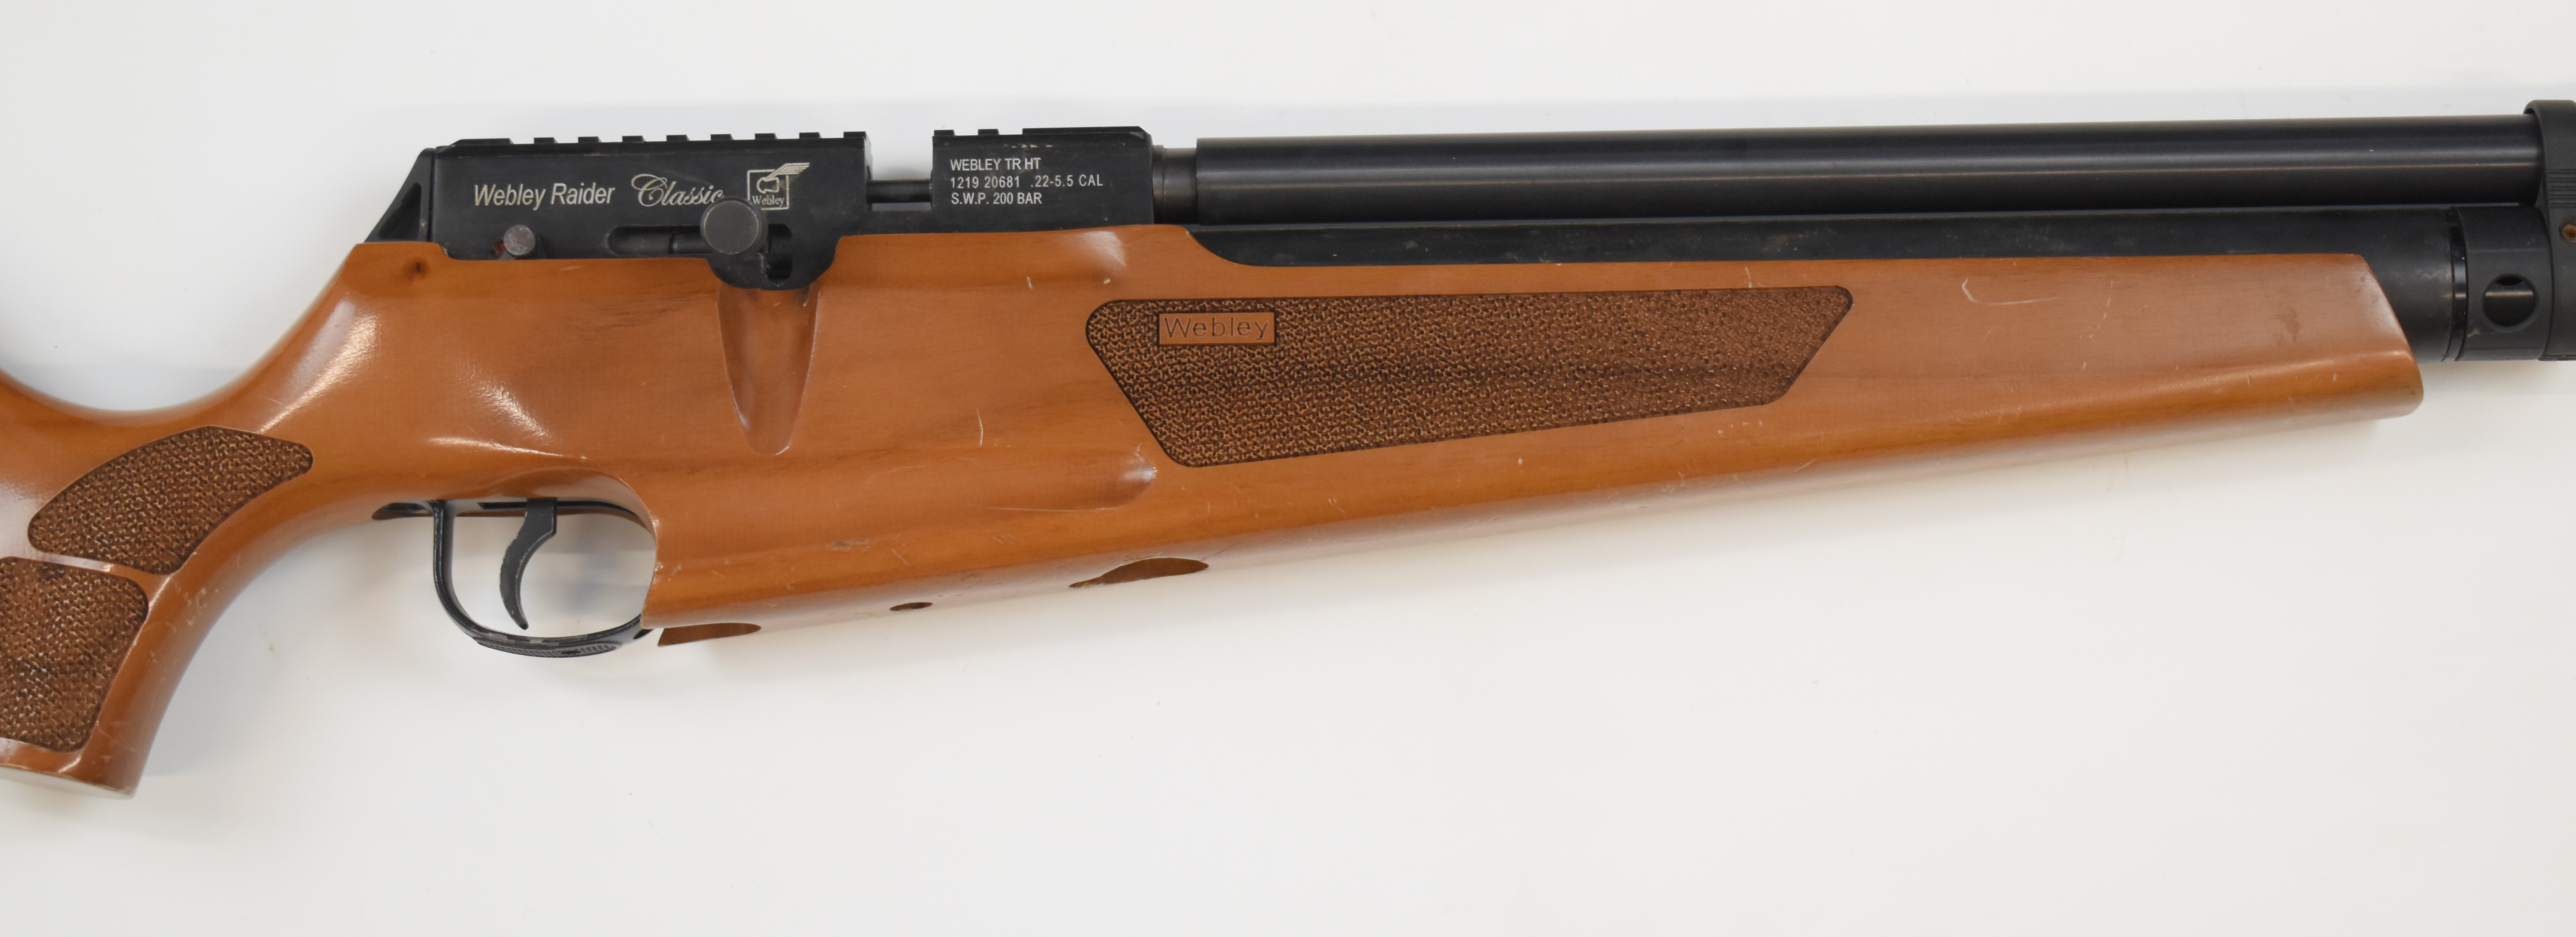 Webley Raider Classic .22 PCP air rifle with textured semi-pistol grip and forend, raised cheek - Image 4 of 10